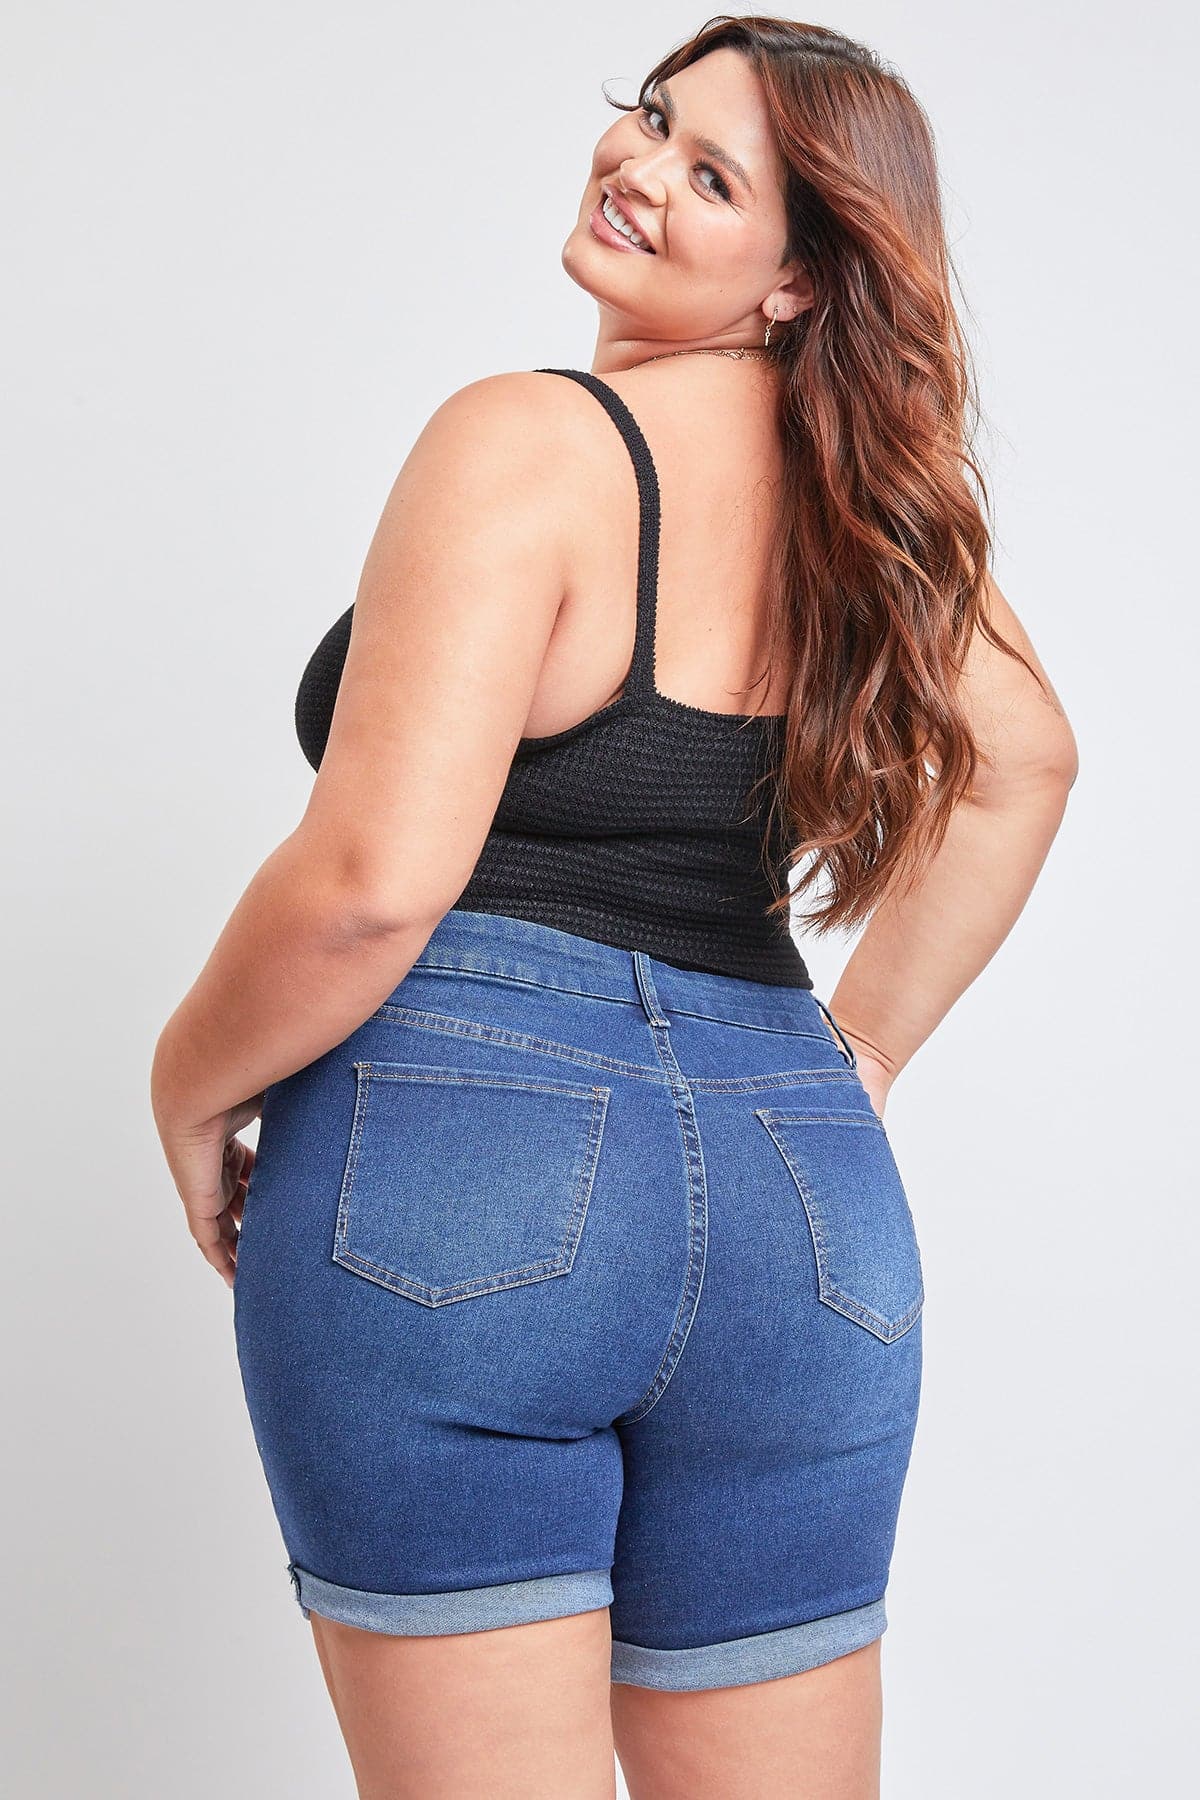 Plus Size Women's Curvy Fit Shorts With Rolled Cuffs-Sale